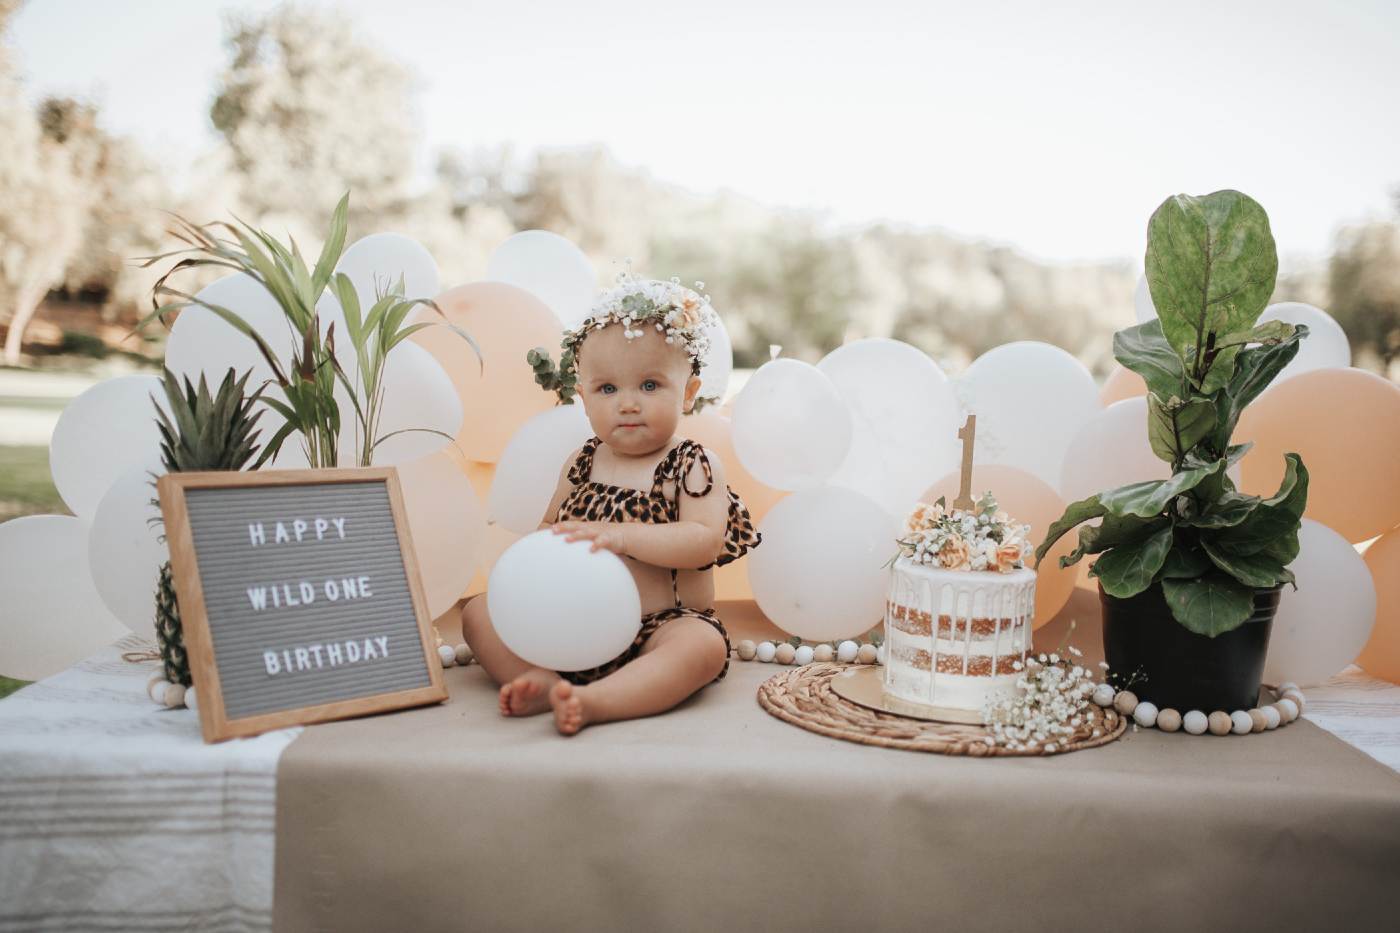 First Birthday Party (on a budget) Tips